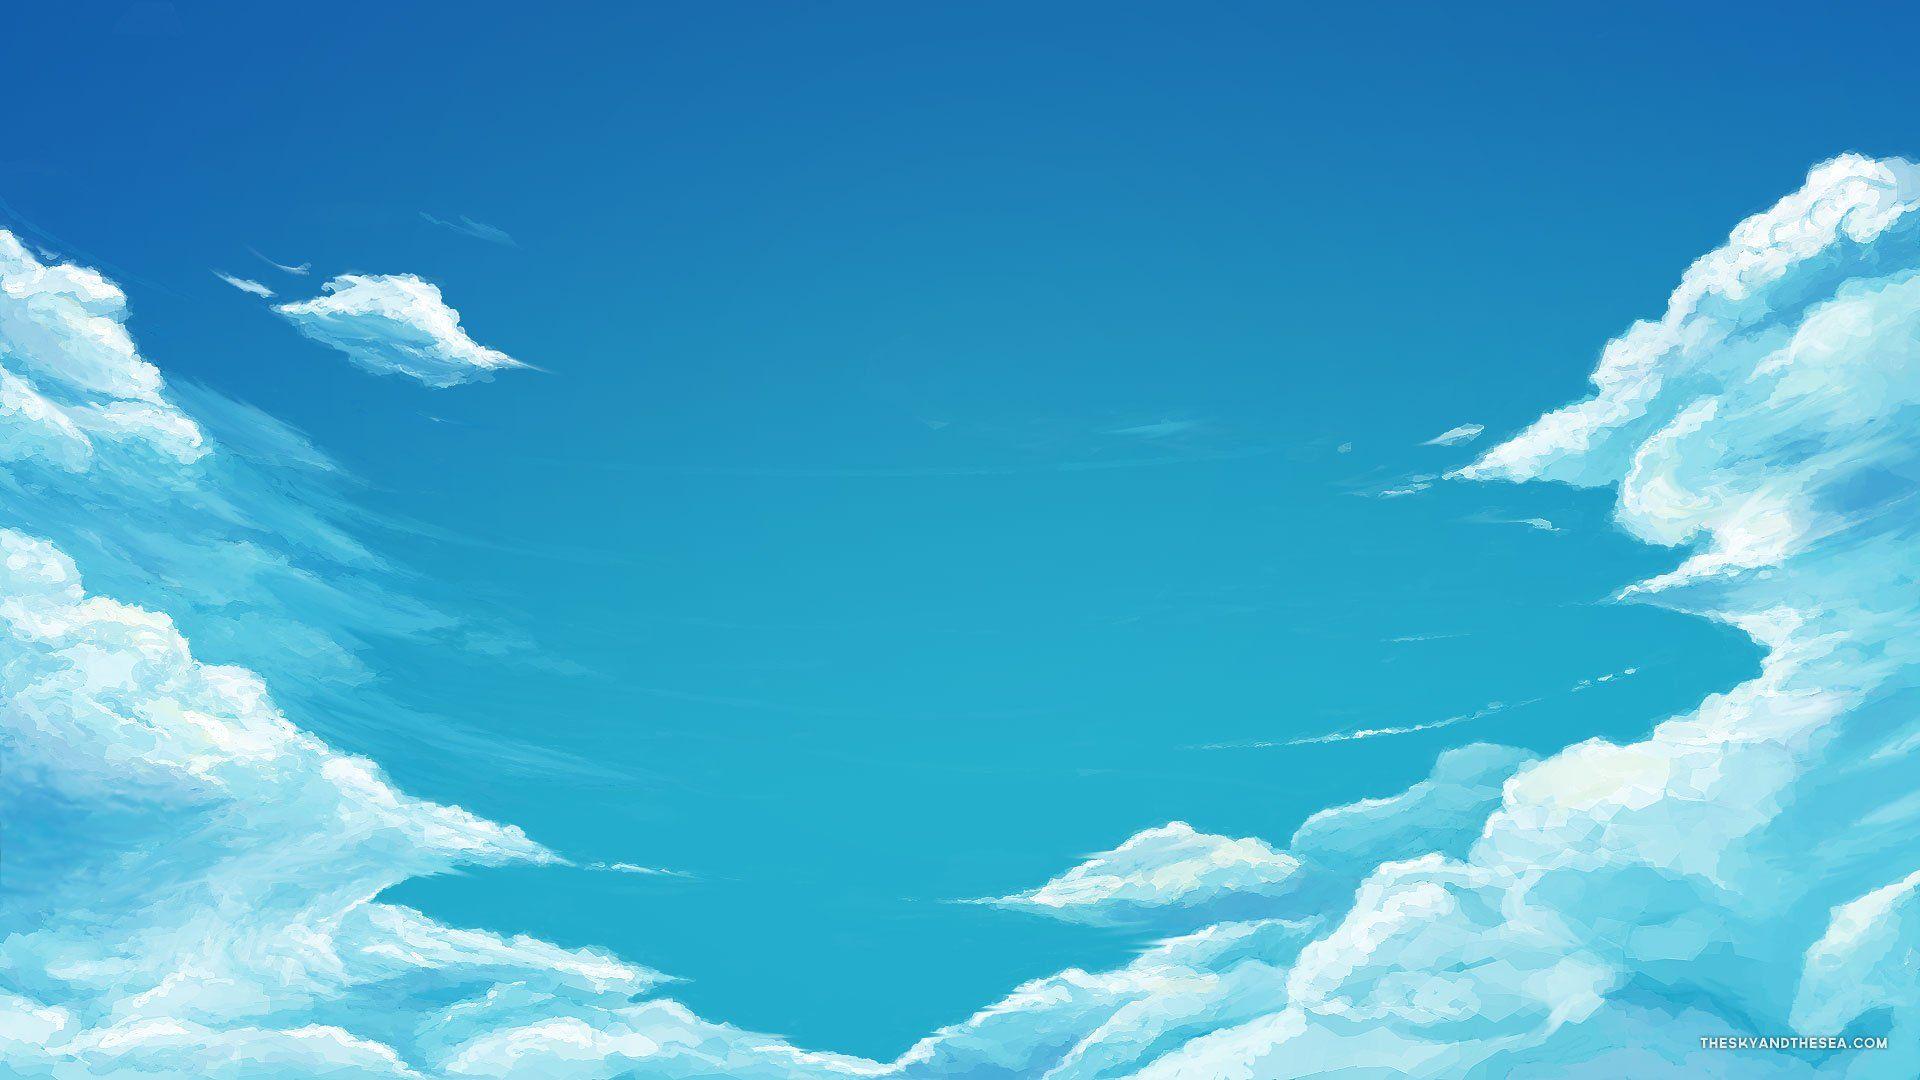 Free Heaven, Cloudy, Air Background Images, Sky Atmosphere Weather Clouds  Background Photo Background PNG and Vectors | Hình nền kỹ thuật số, Phong  cảnh, Hình nền